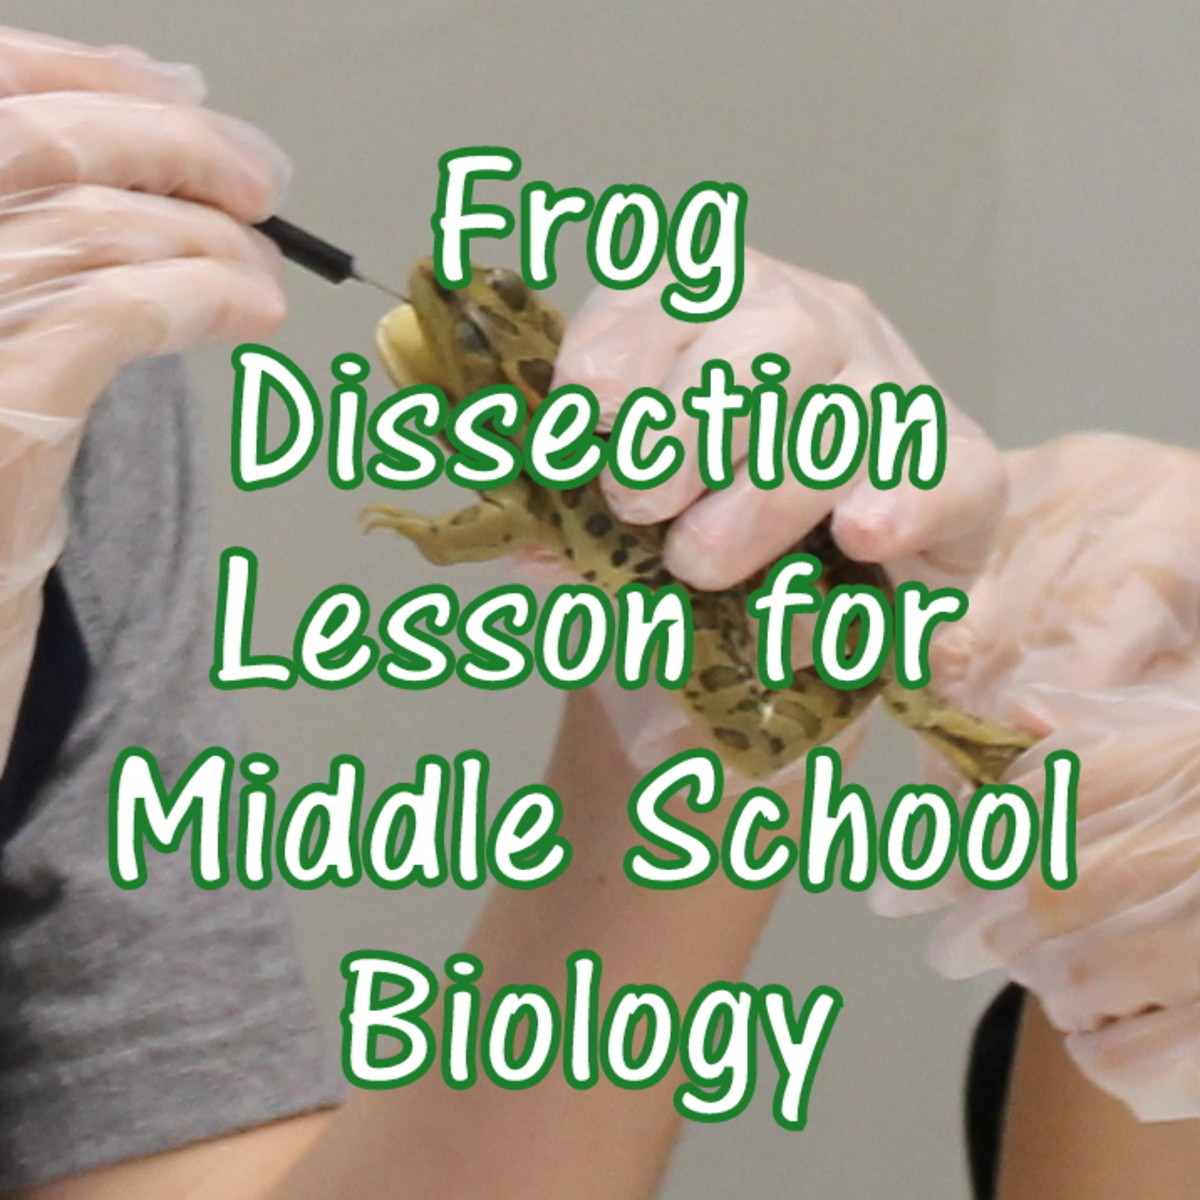 Frog Dissection Lesson Plan for Middle School Biology